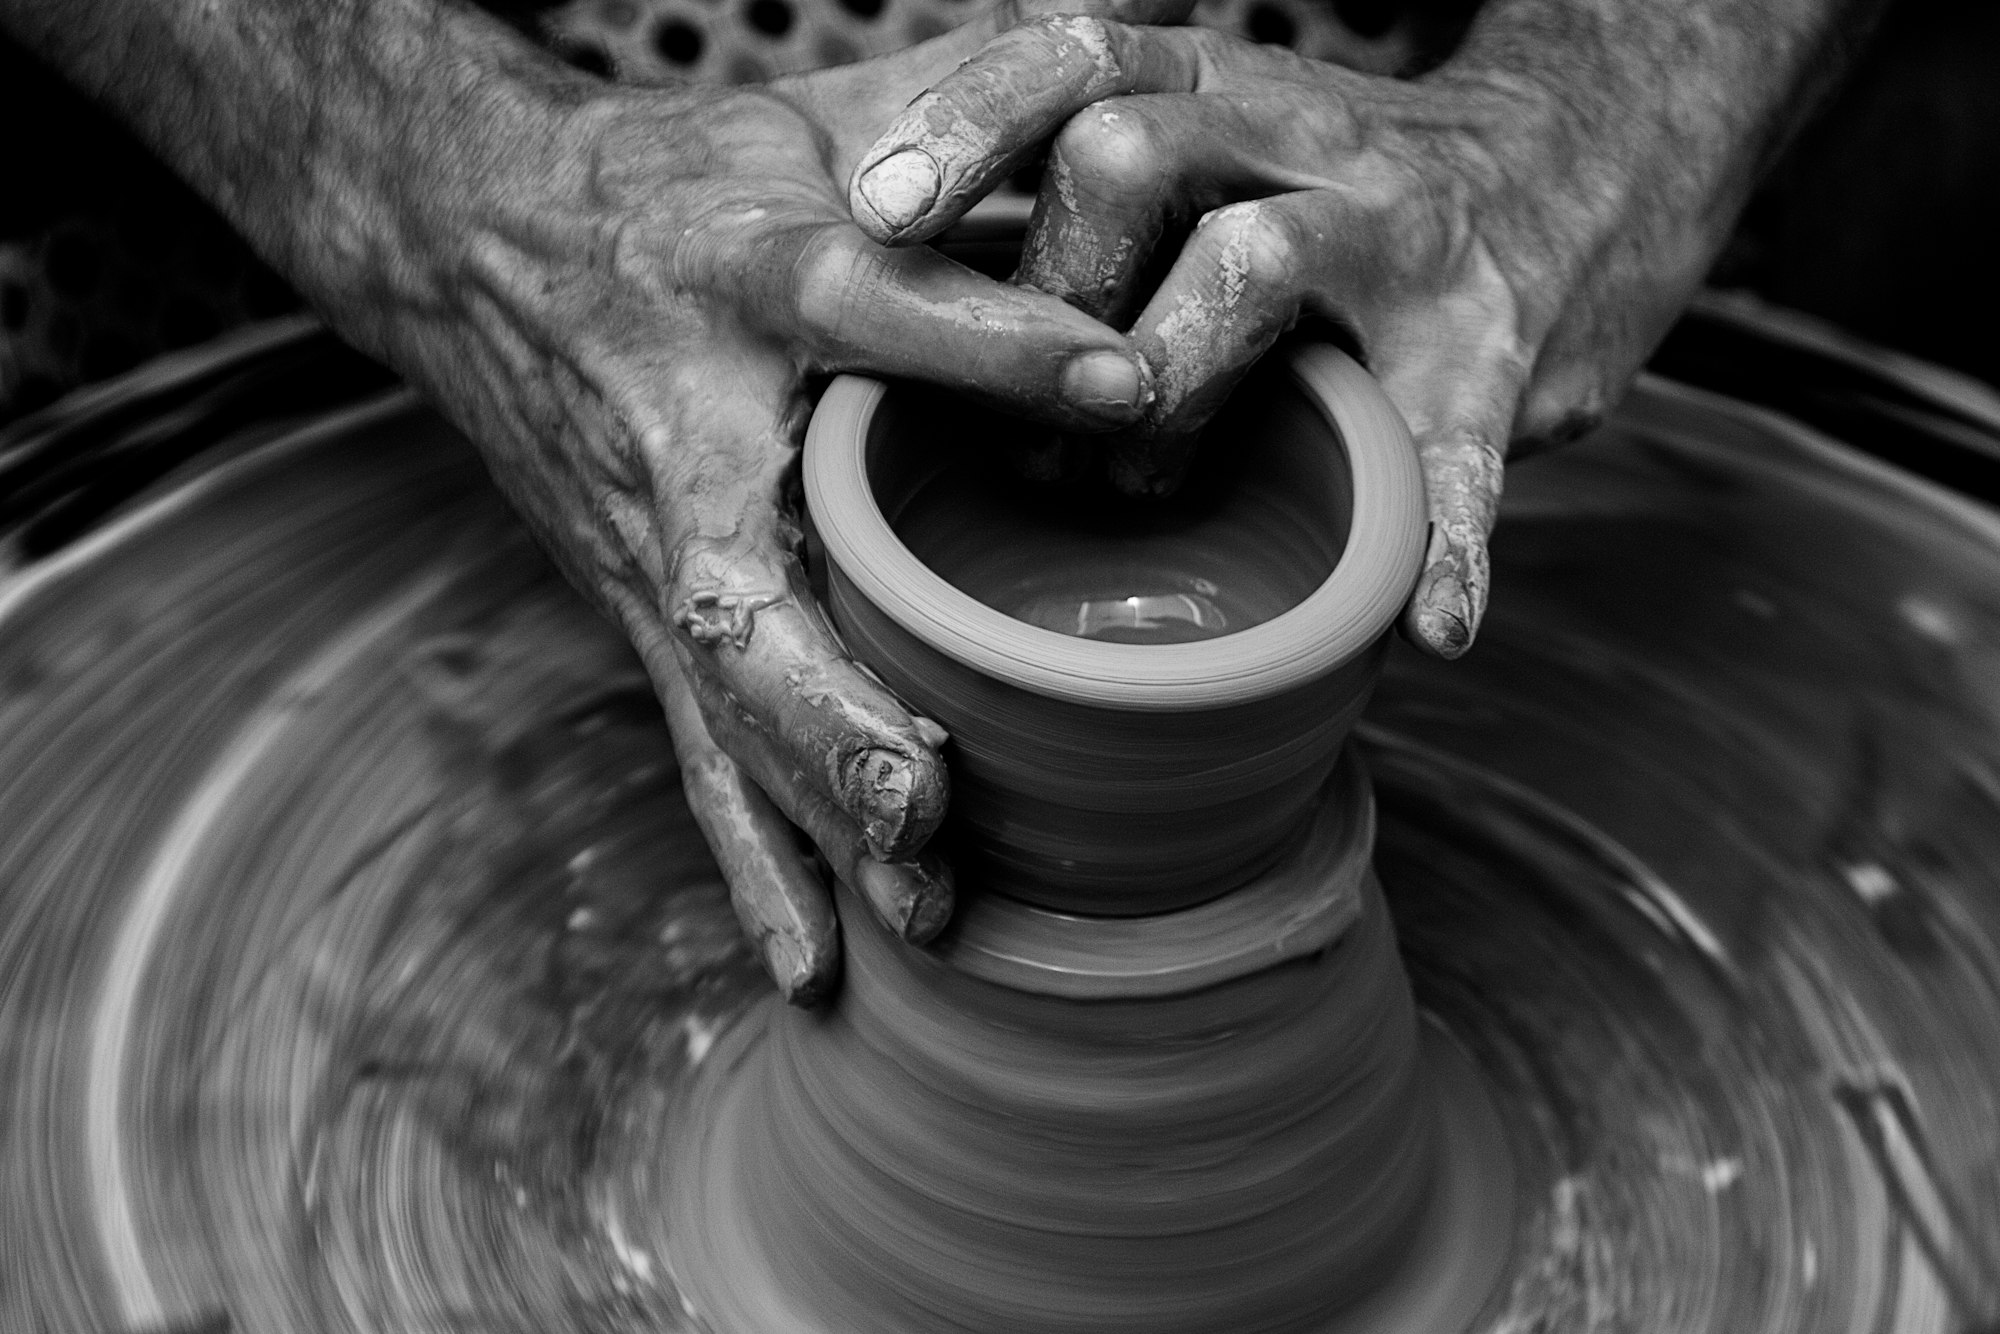 Potter using a pottery wheel to form a piece that is early in its development.